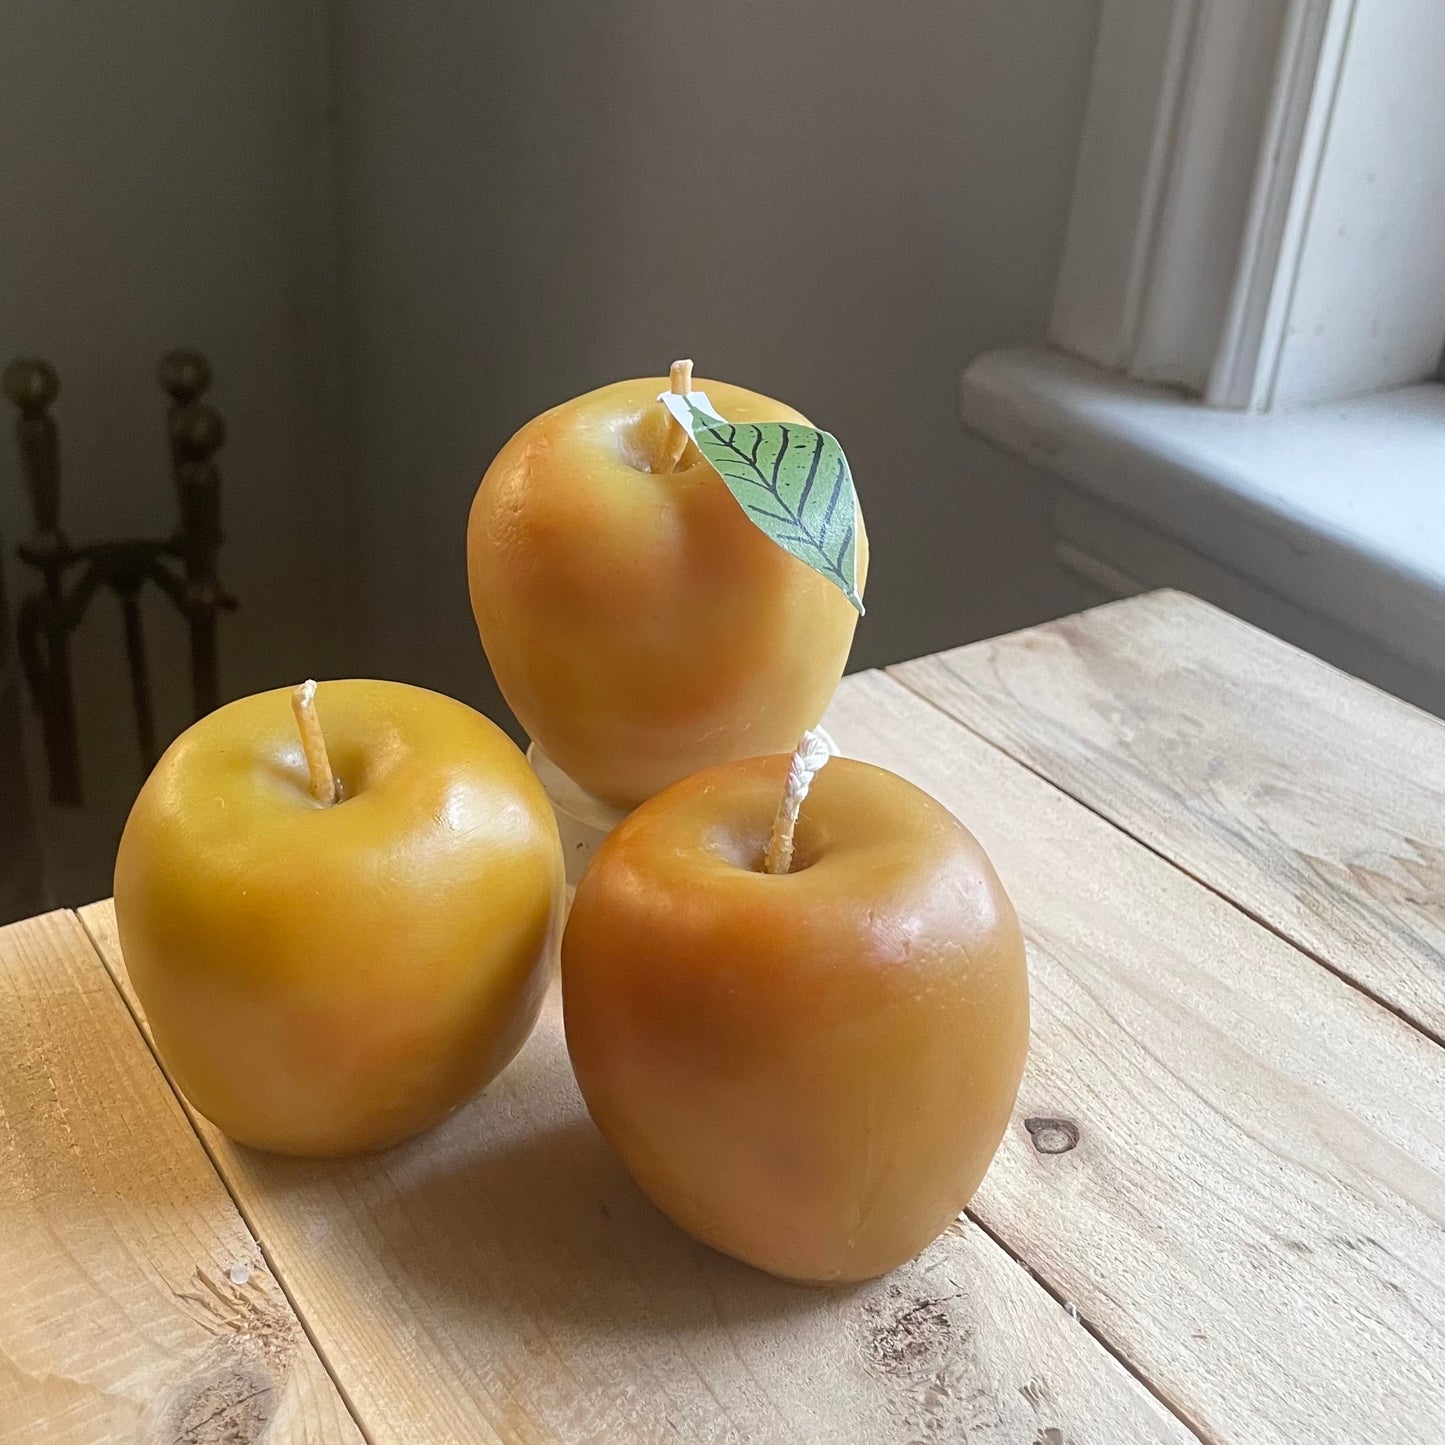 APPLE candle in pure beeswax - fruit candle, apple, beeswax, beeswax candle - one candle